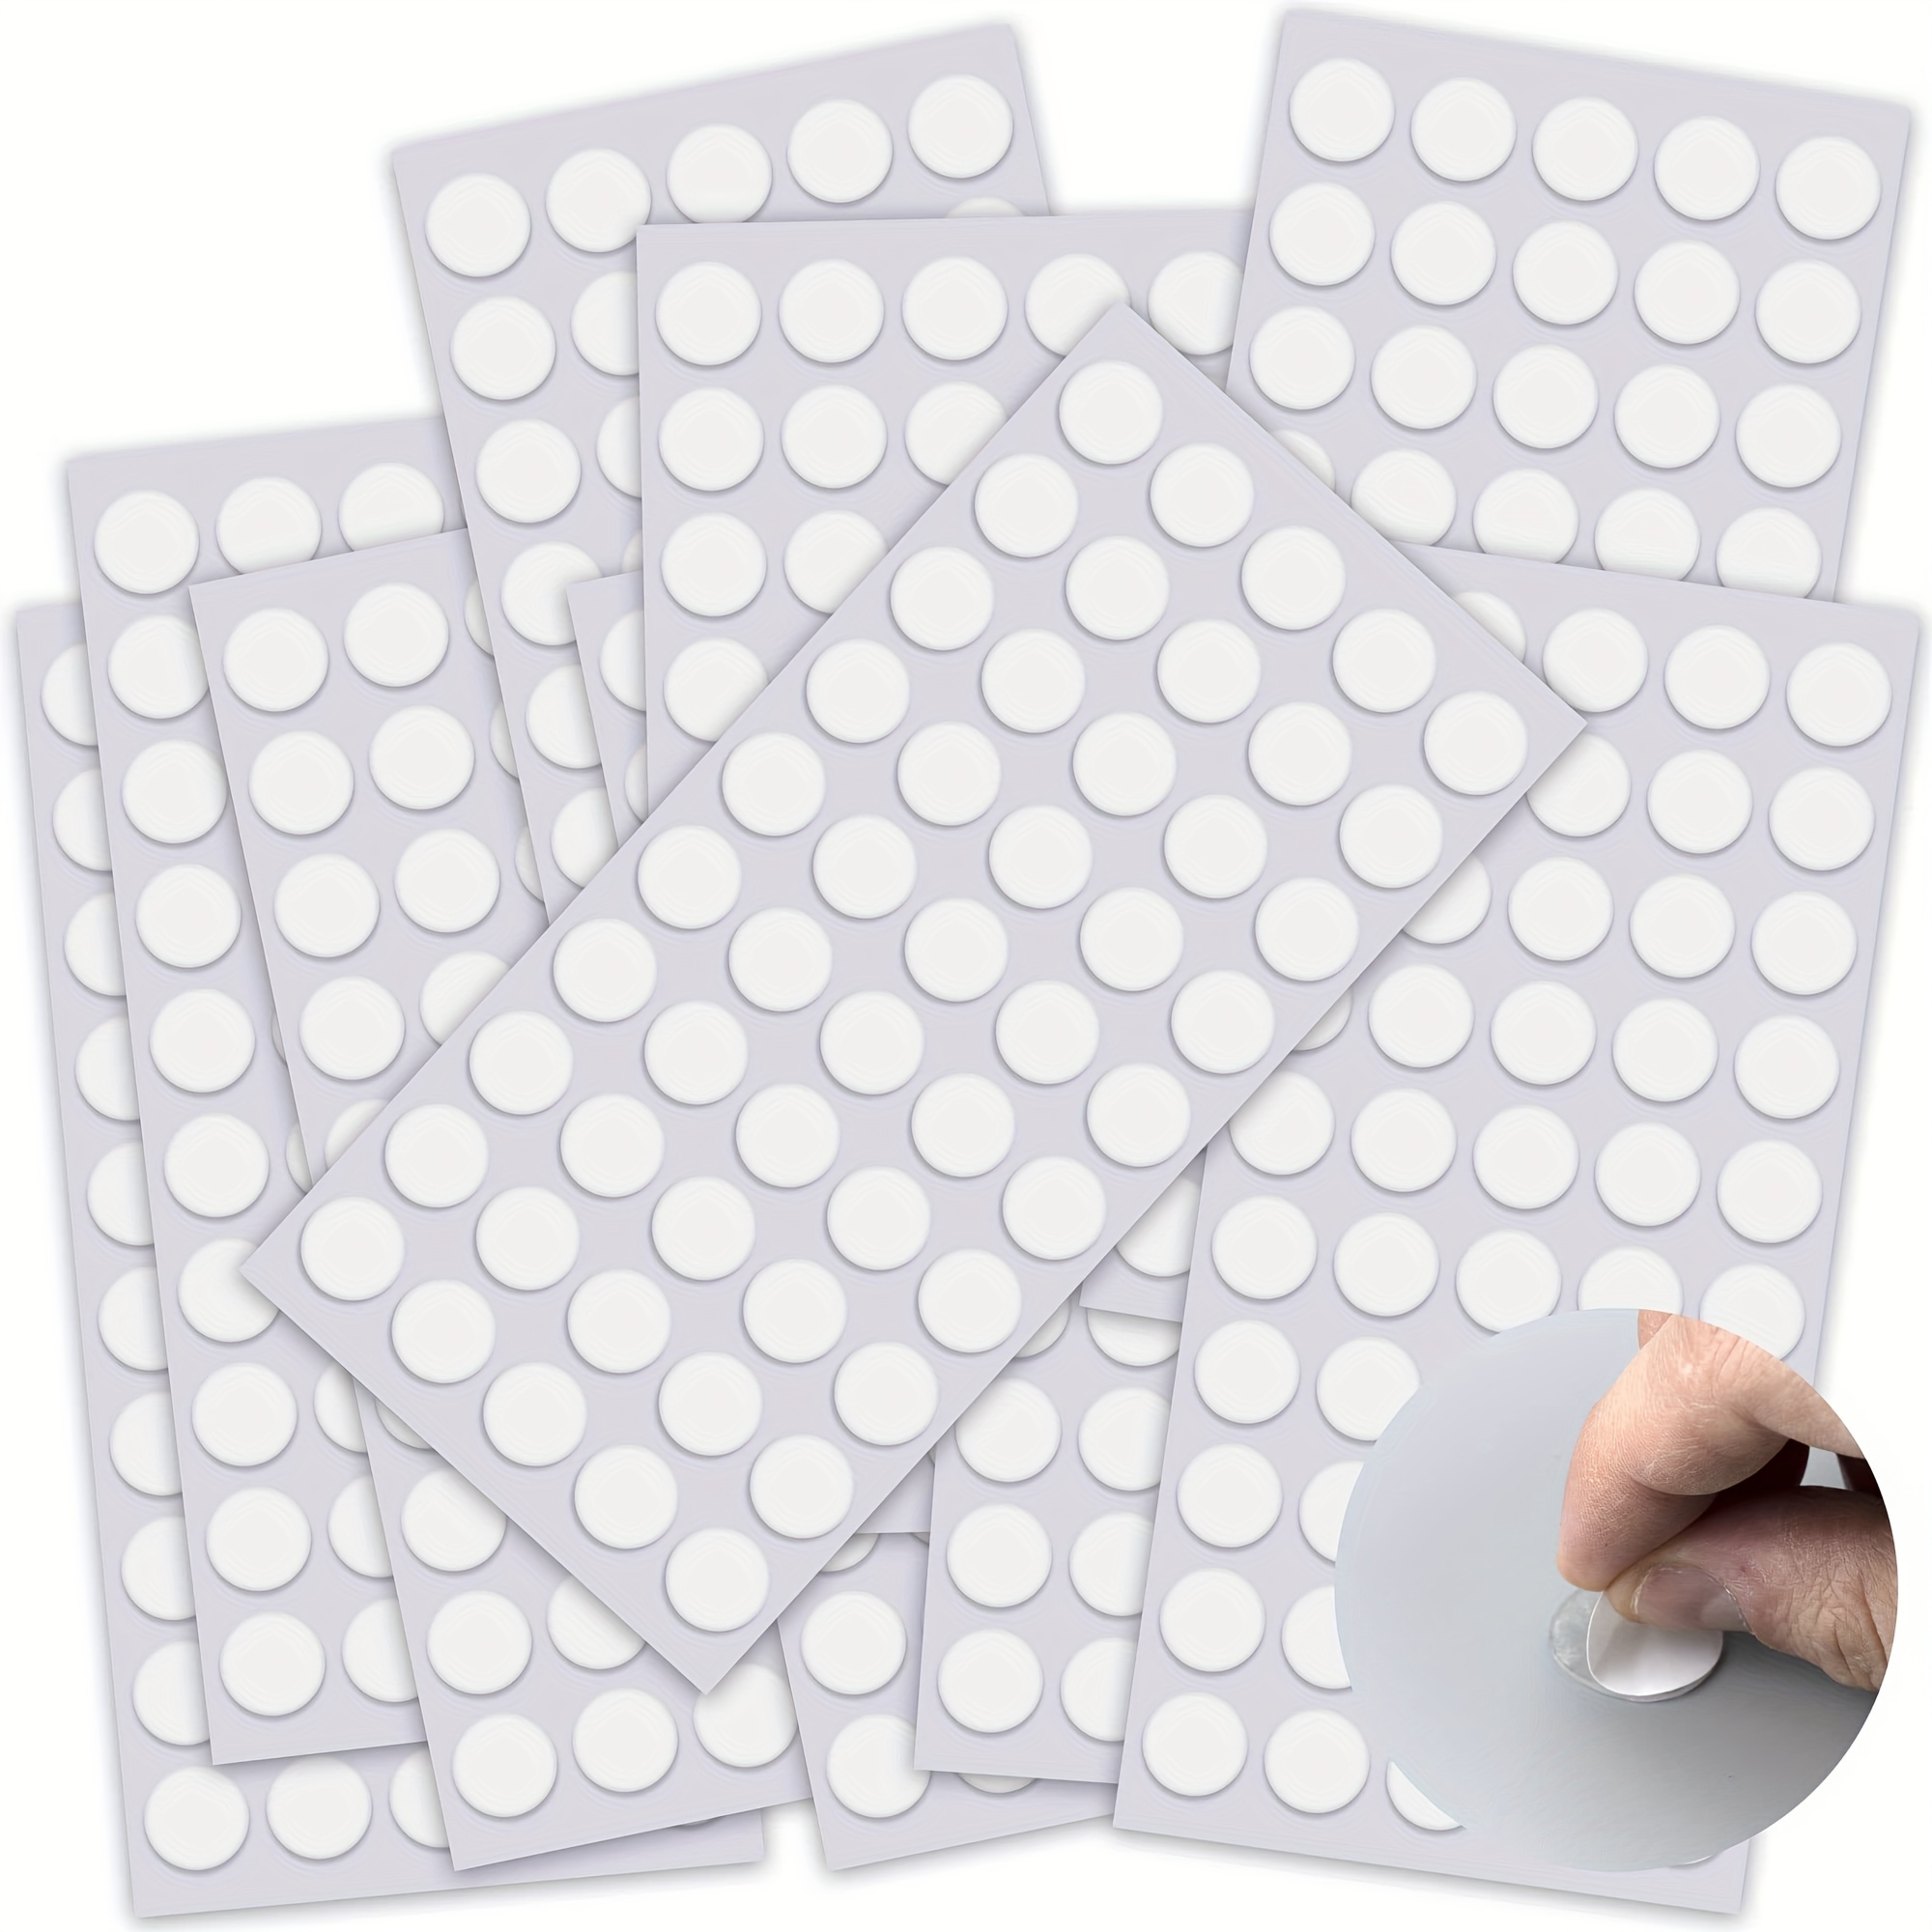  96pcs Adhesive Poster Tacky Putty Sticky - Museum Putty,  Hanging Tack for Walls, Removable and Non-Marking,Non-Toxic and  Safe(White). : Office Products